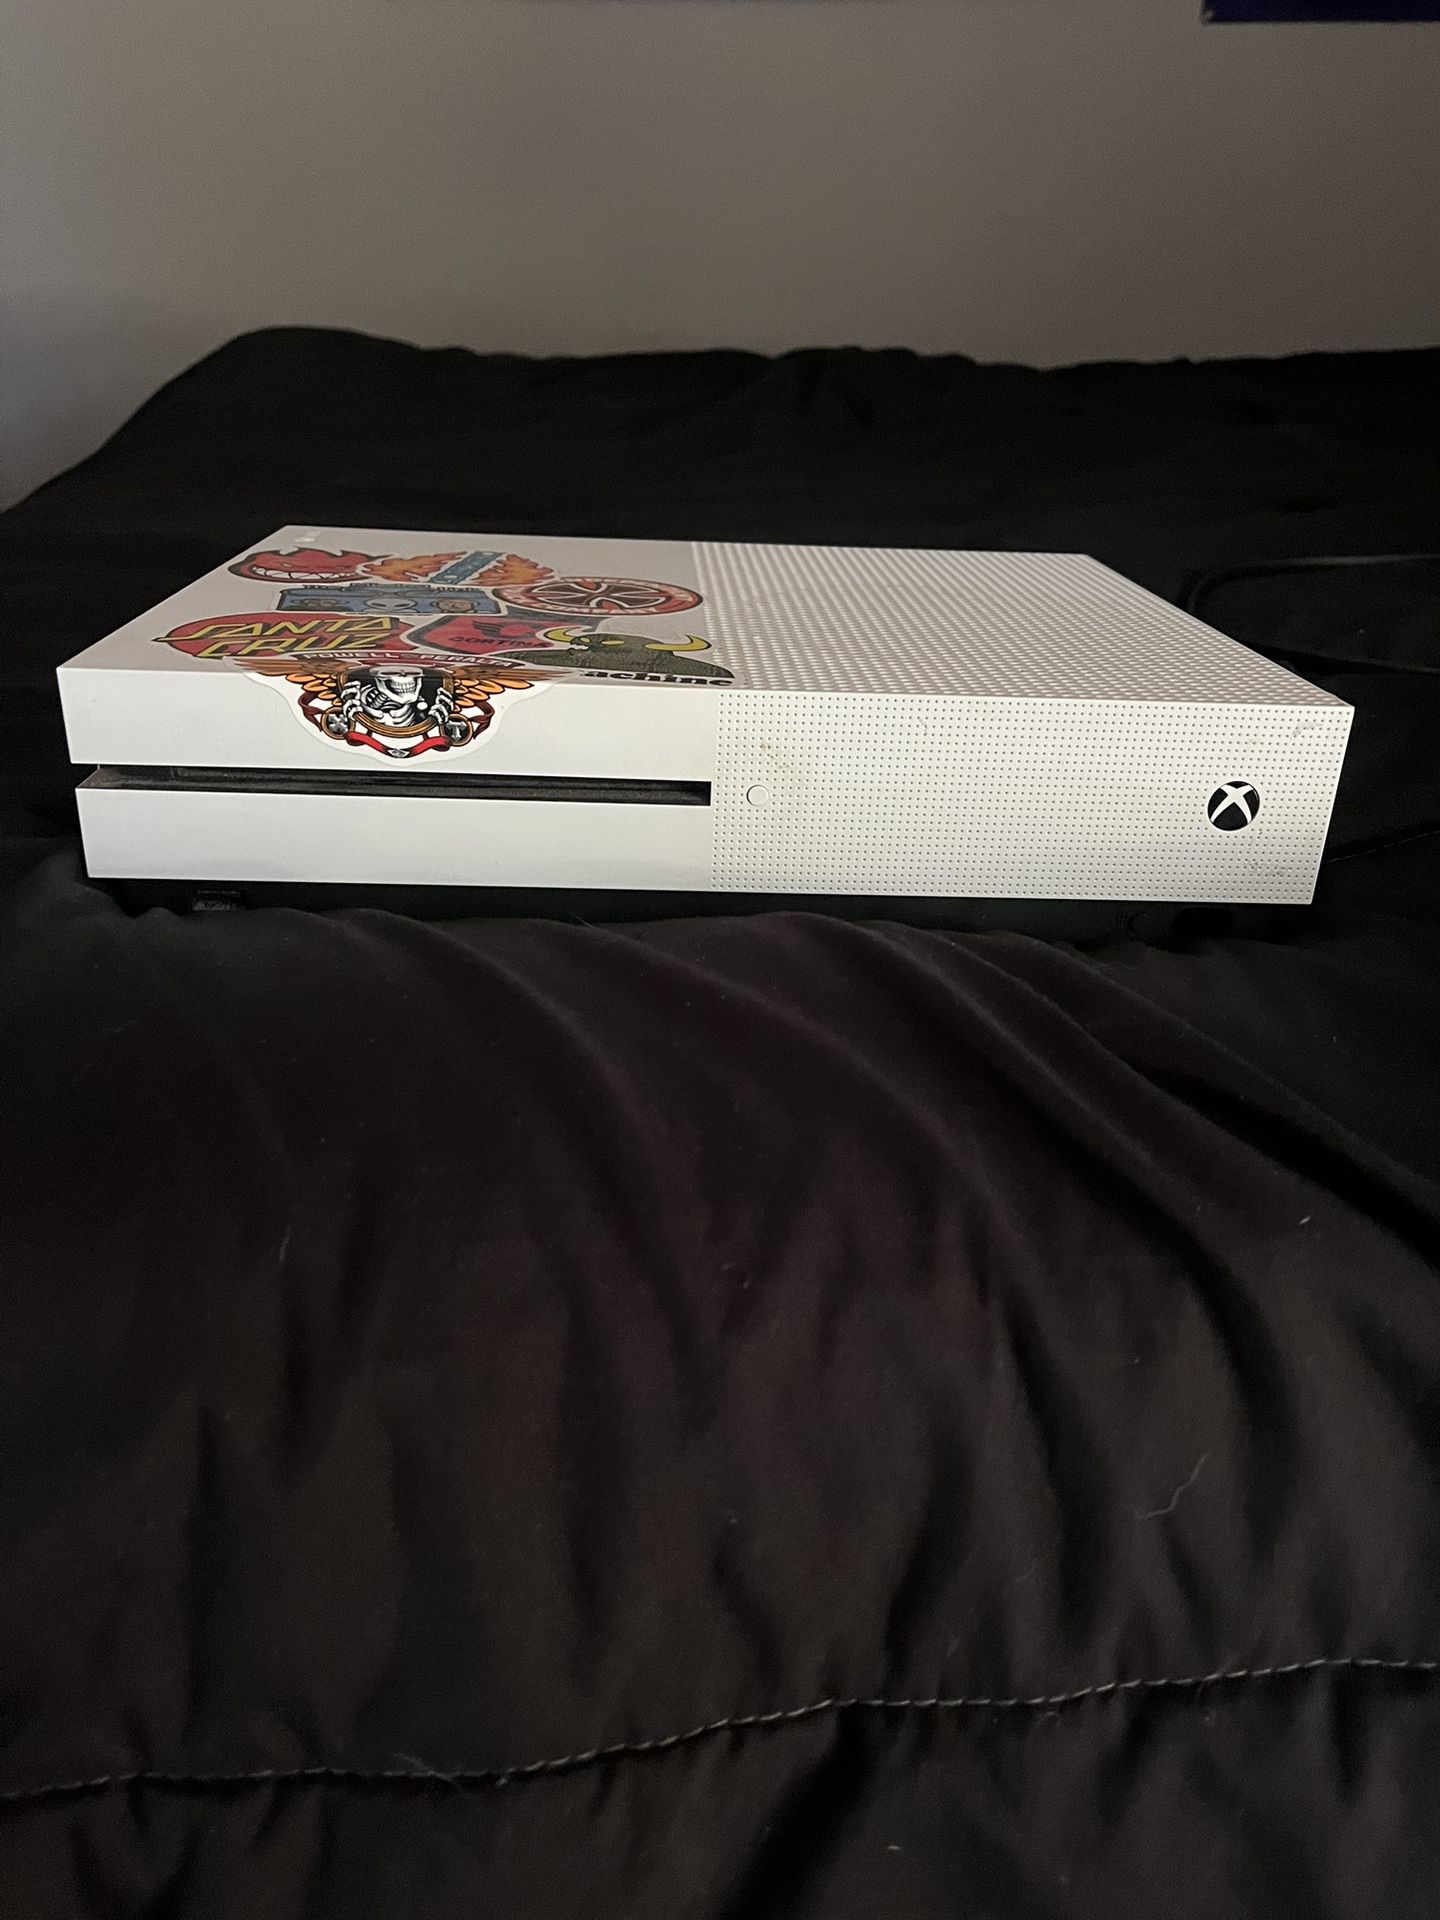 Xbox One (Comes with HDMI Cord) 